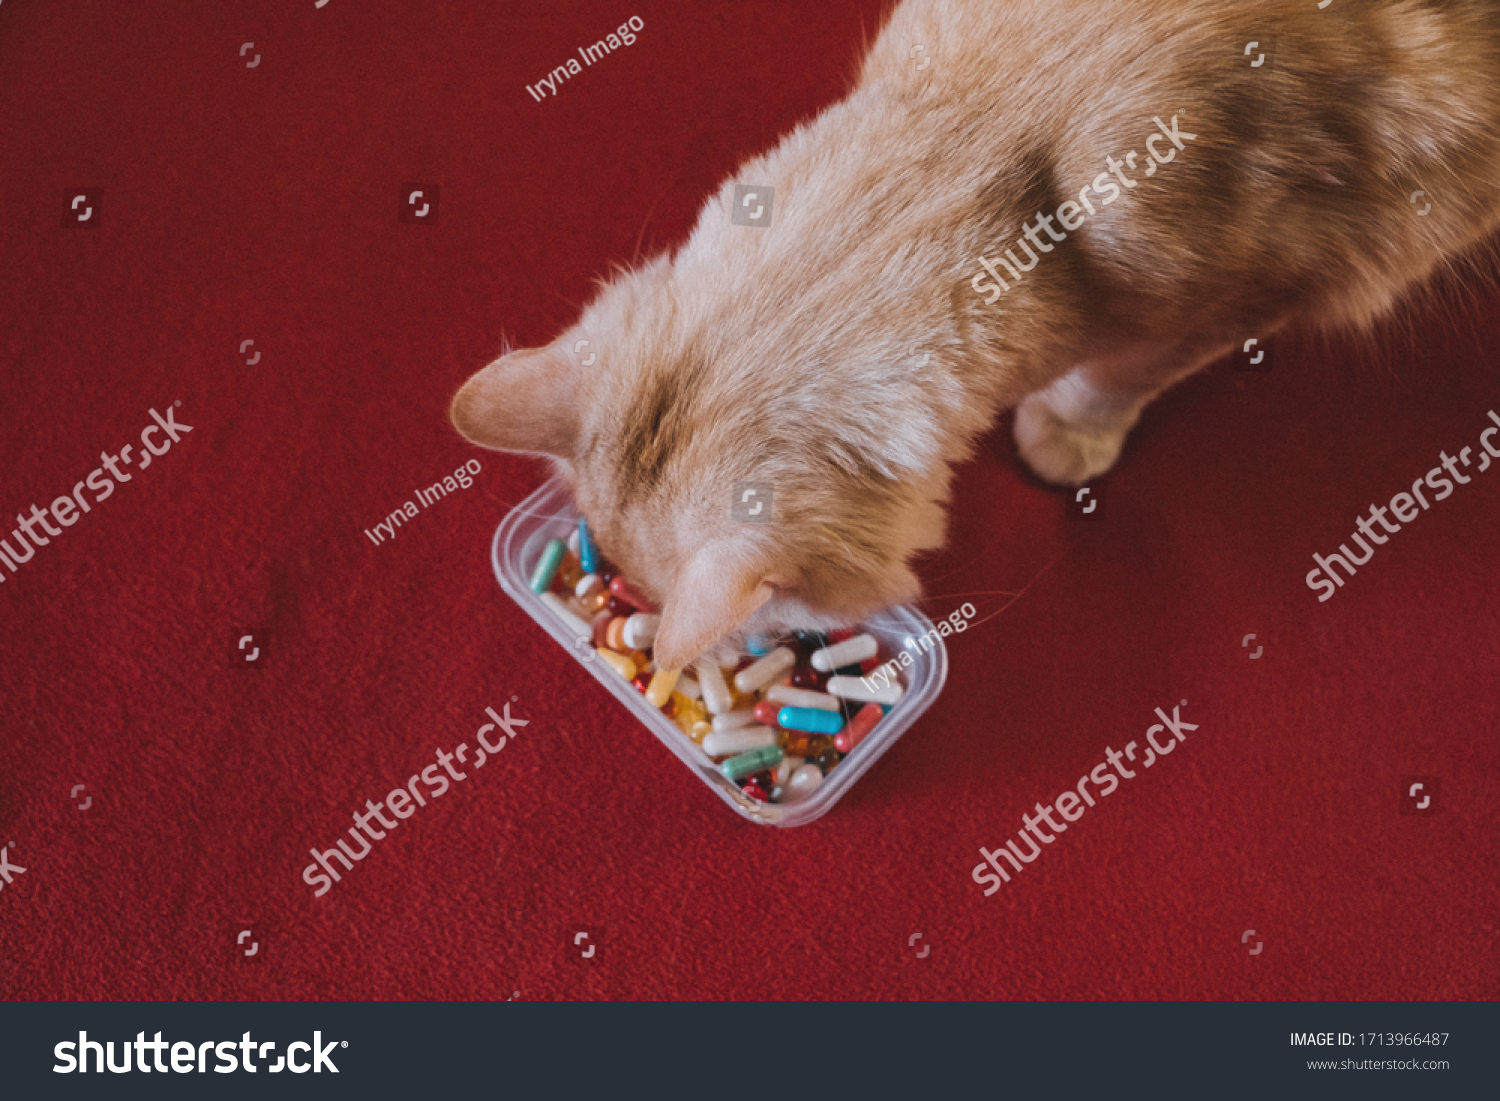 Cat and many pills on a red background. Pets, Cats infected with the coronavirus #1713966487